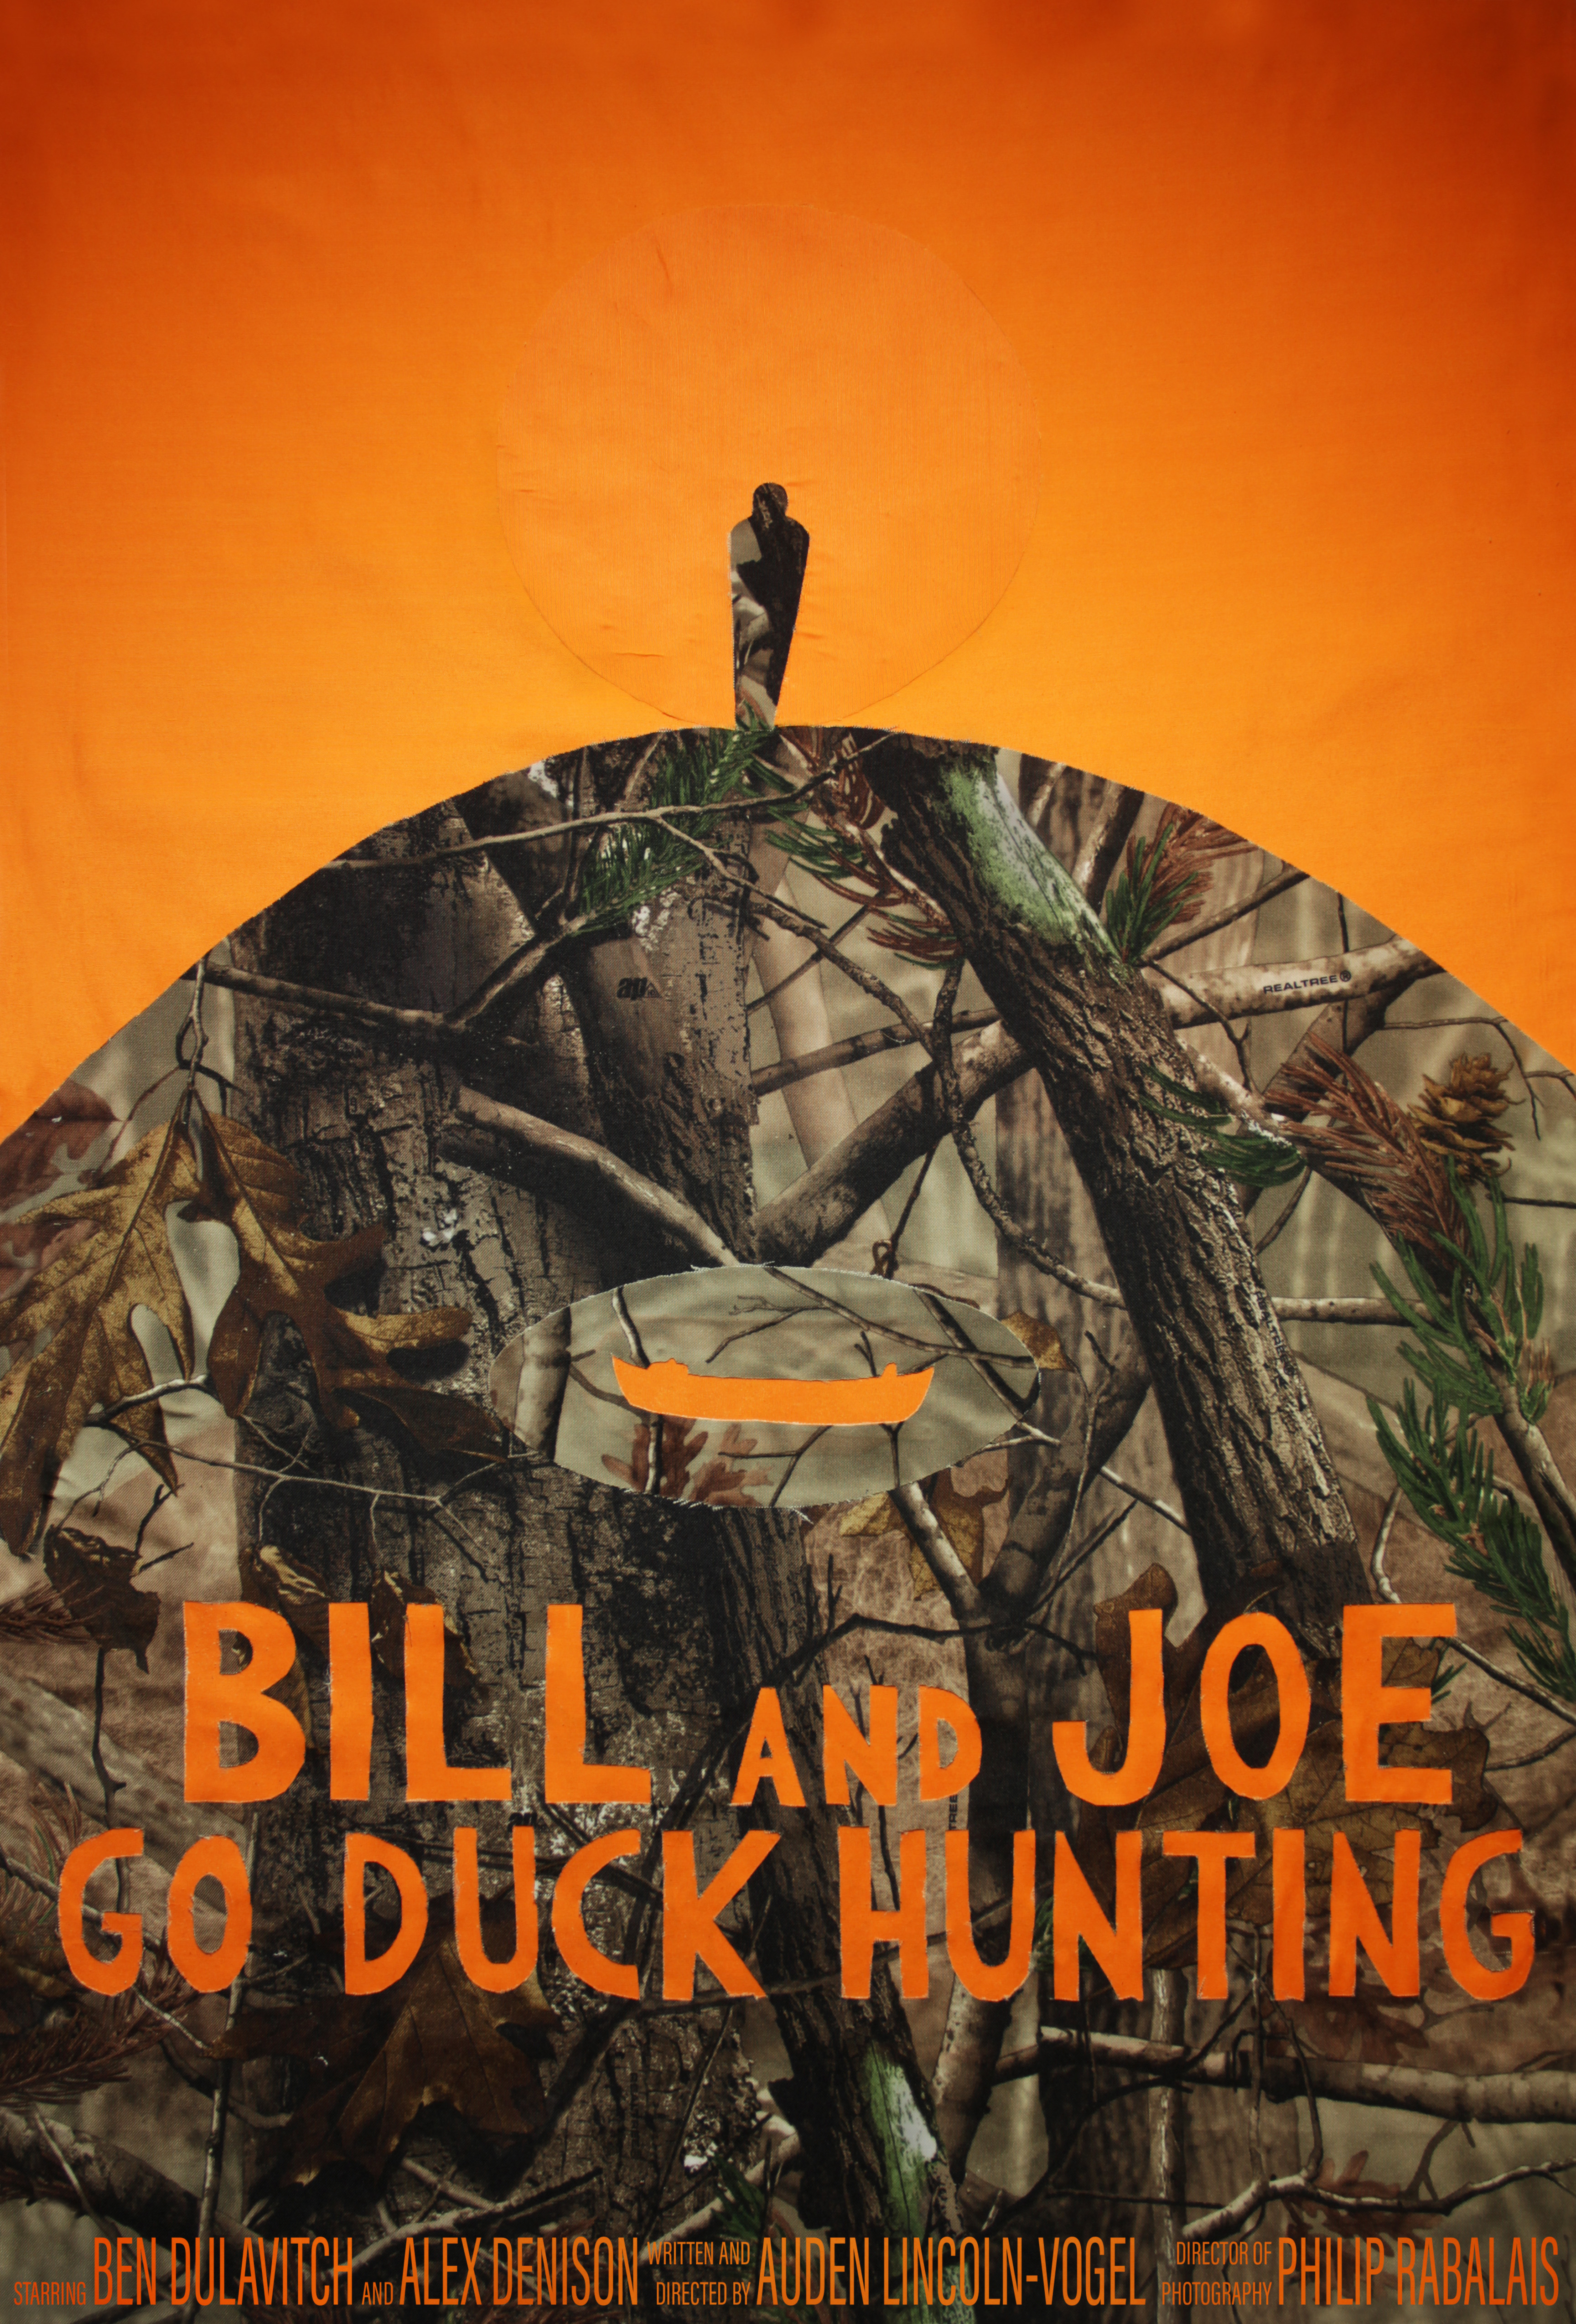 Film poster made from camo and orange fabric